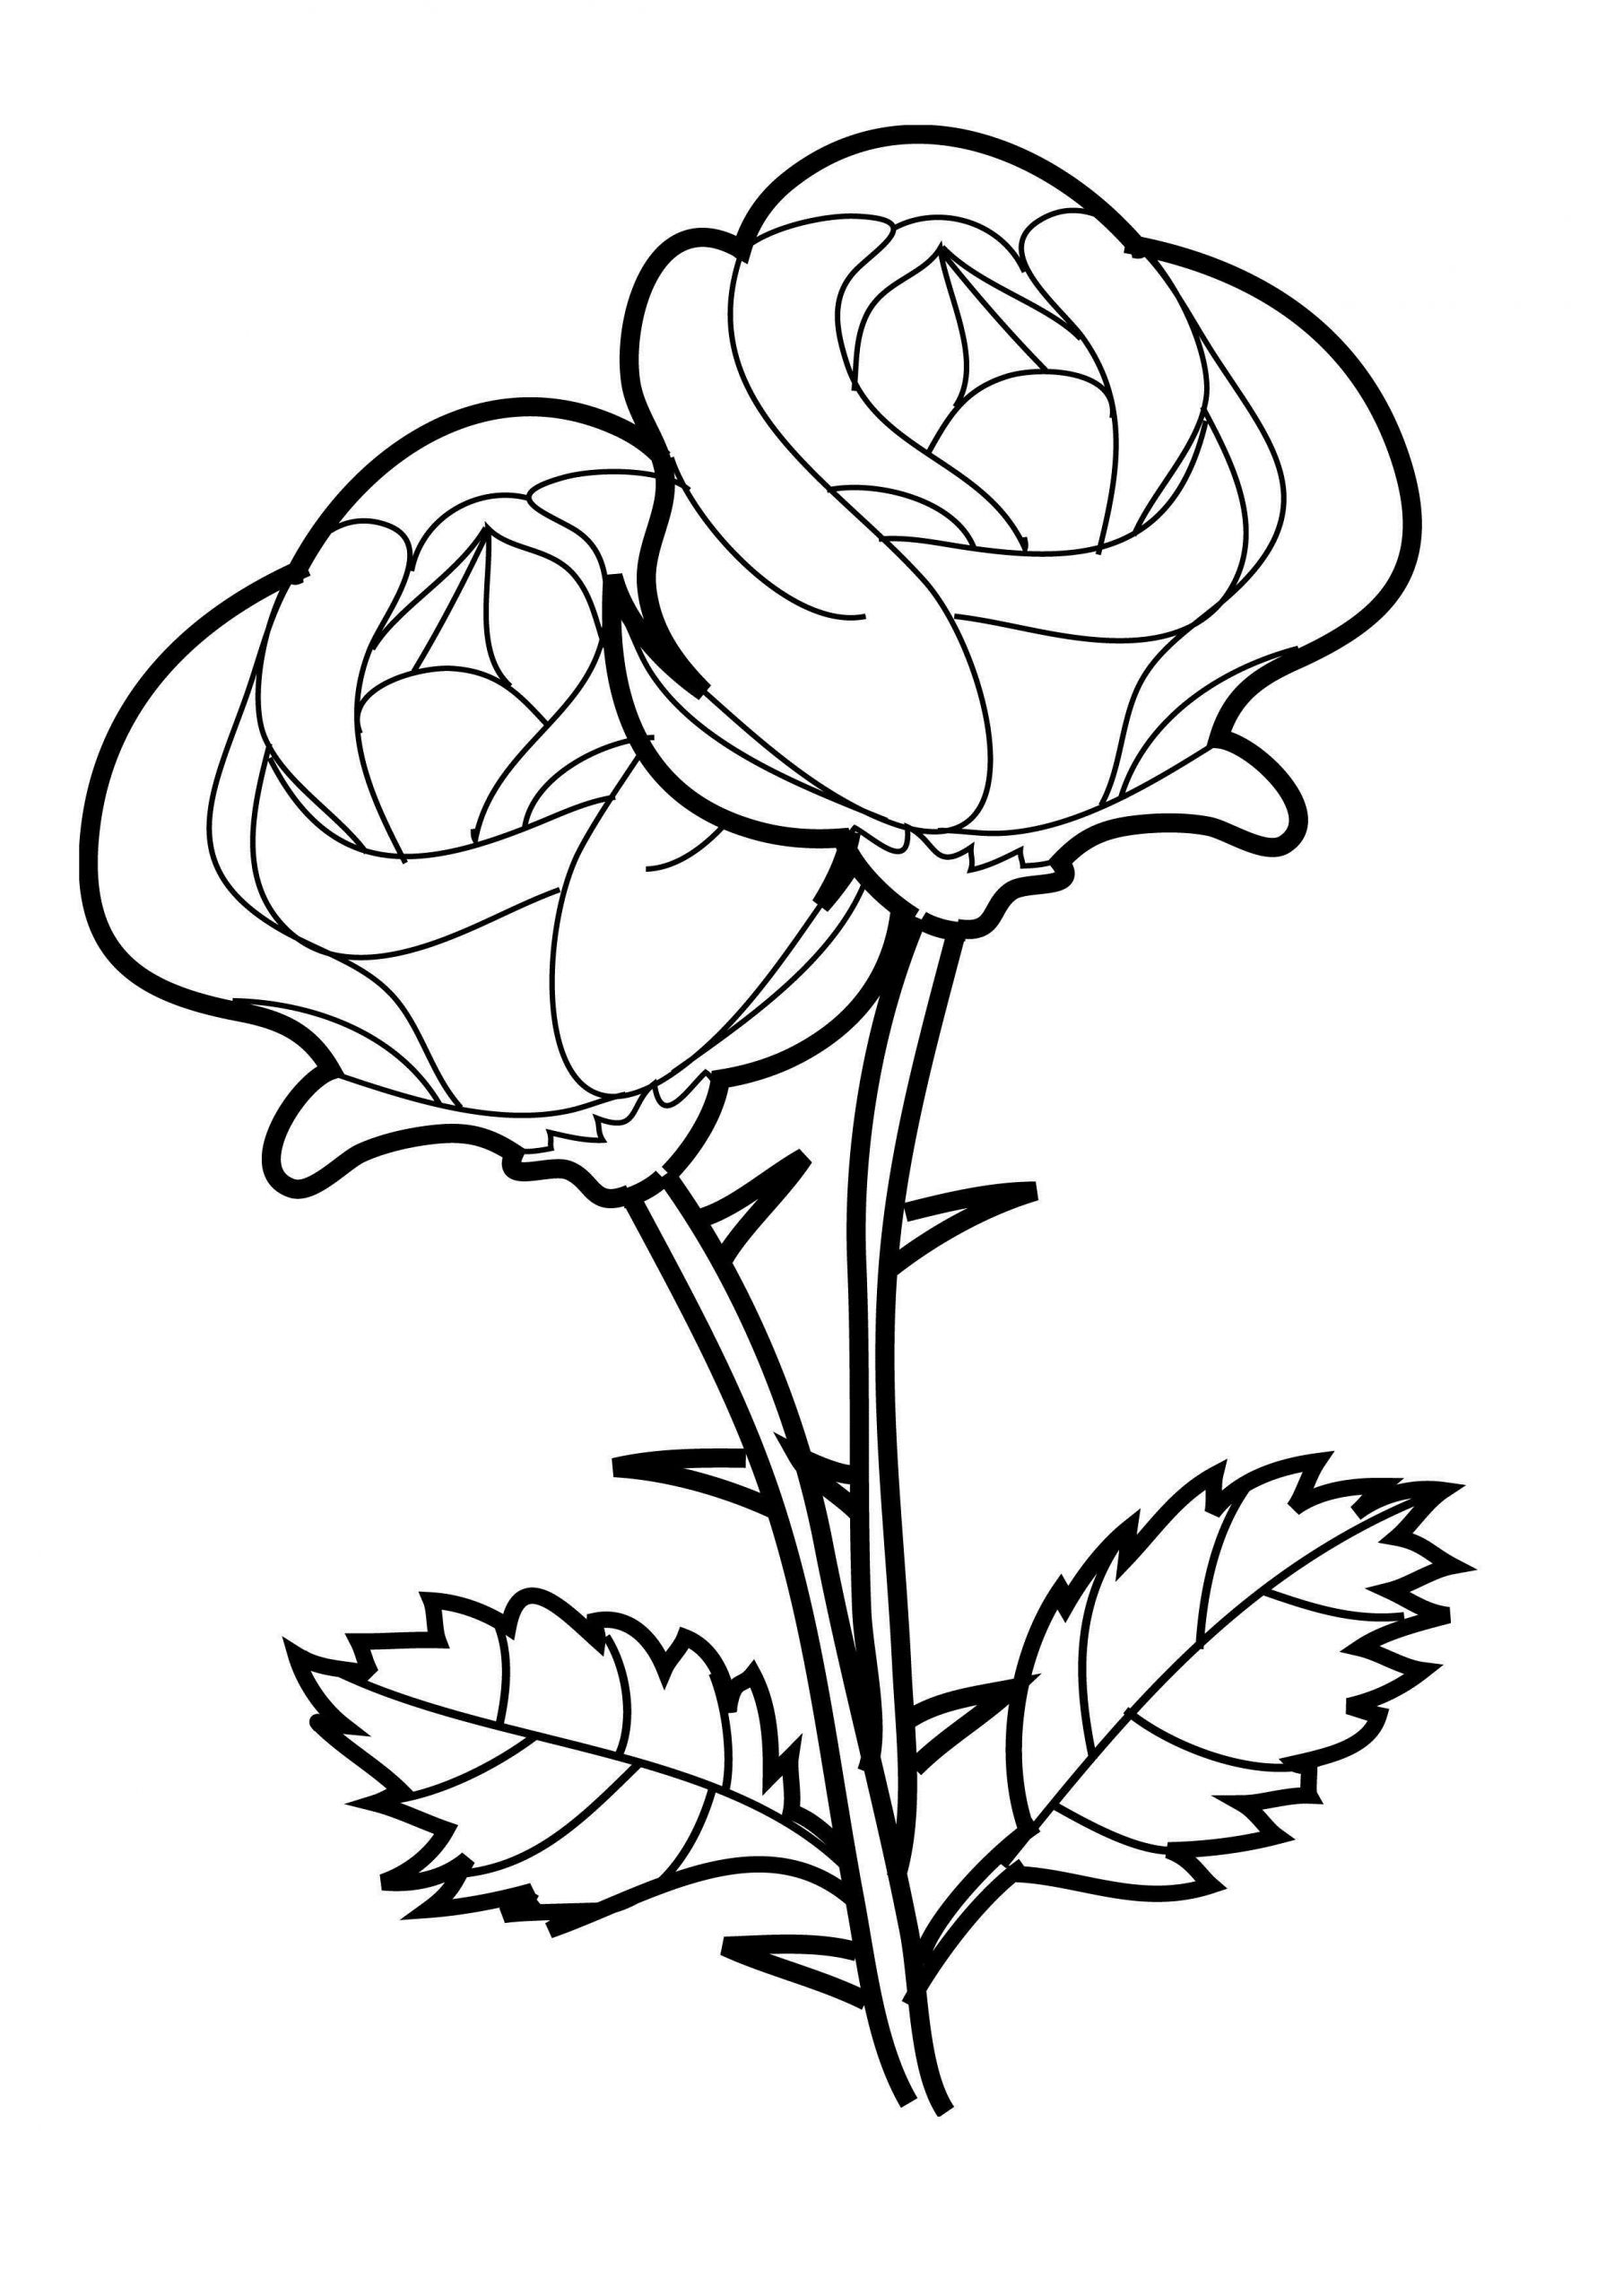 Rose Coloring Pages For Girls
 Rose Coloring Pages for Girls Coloring Pages